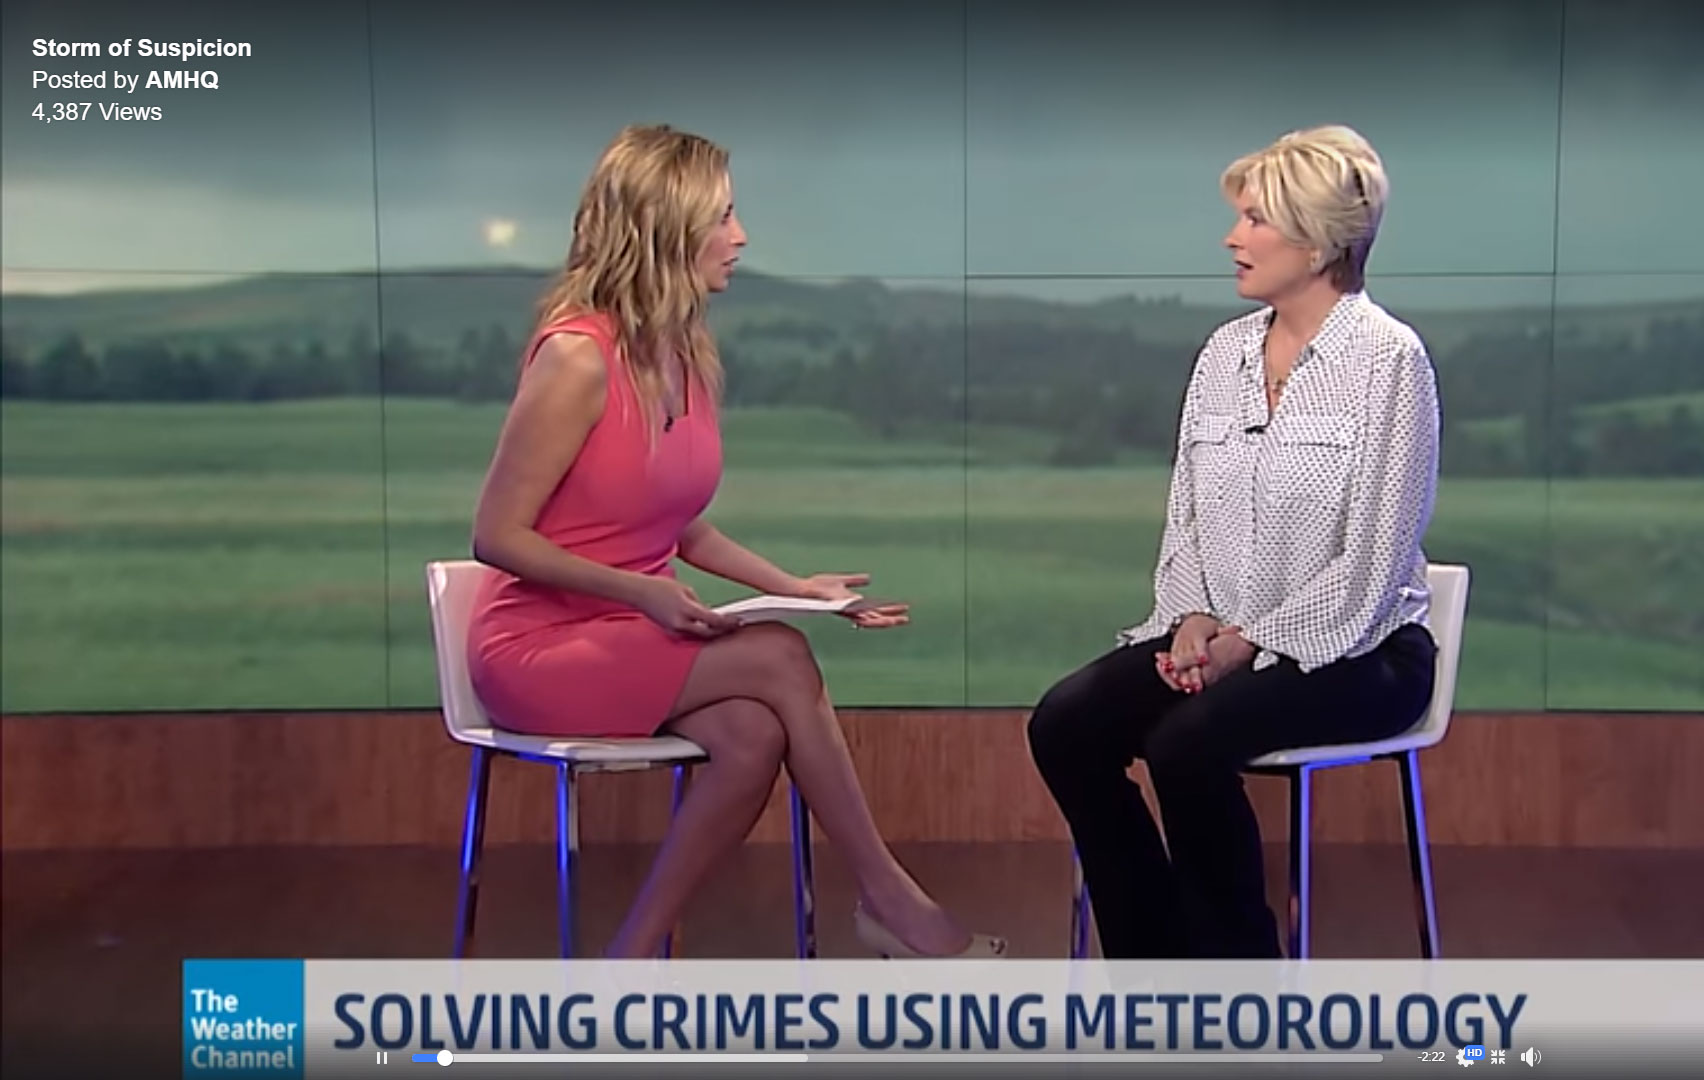 Dr. Austin Interview With Stephanie Abrams Of The Weather Channel Discussing ‘Storm Of Suspicion’